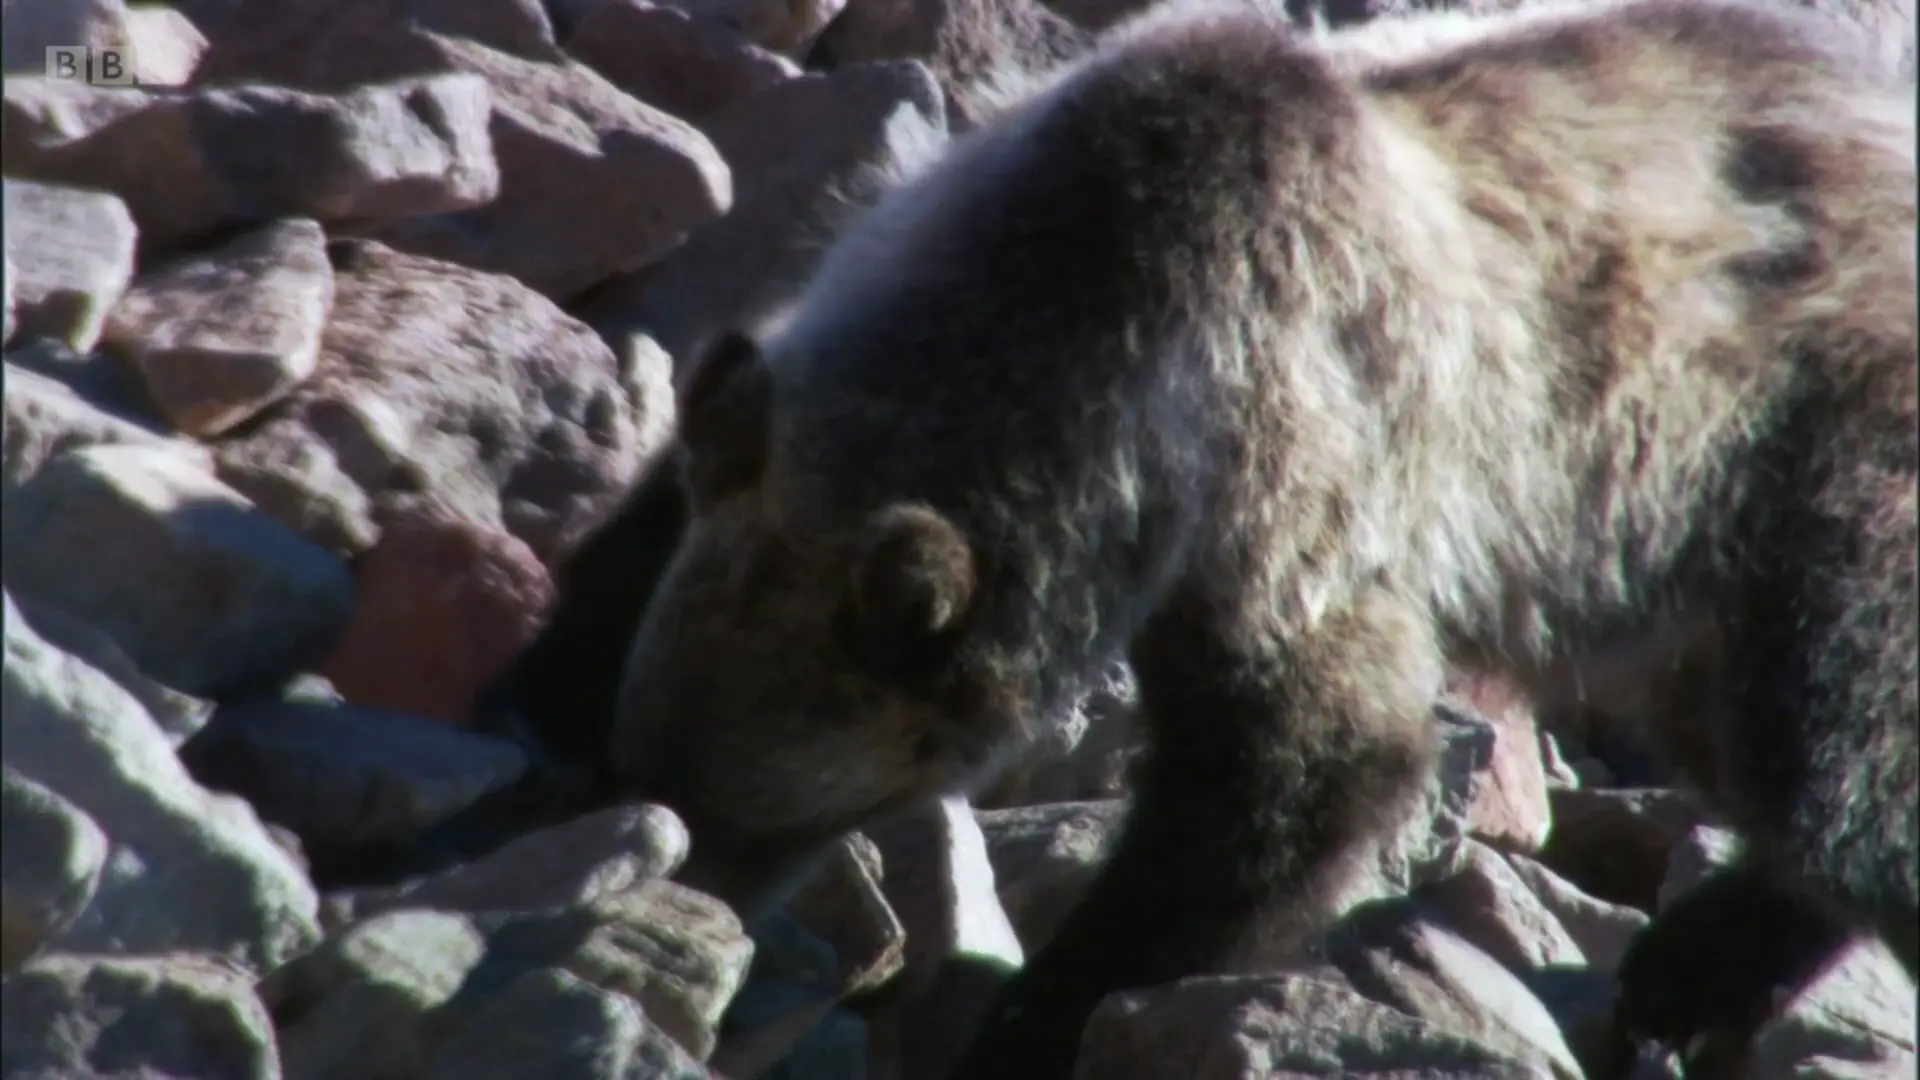 Grizzly bear (Ursus arctos horribilis) as shown in Planet Earth - Mountains